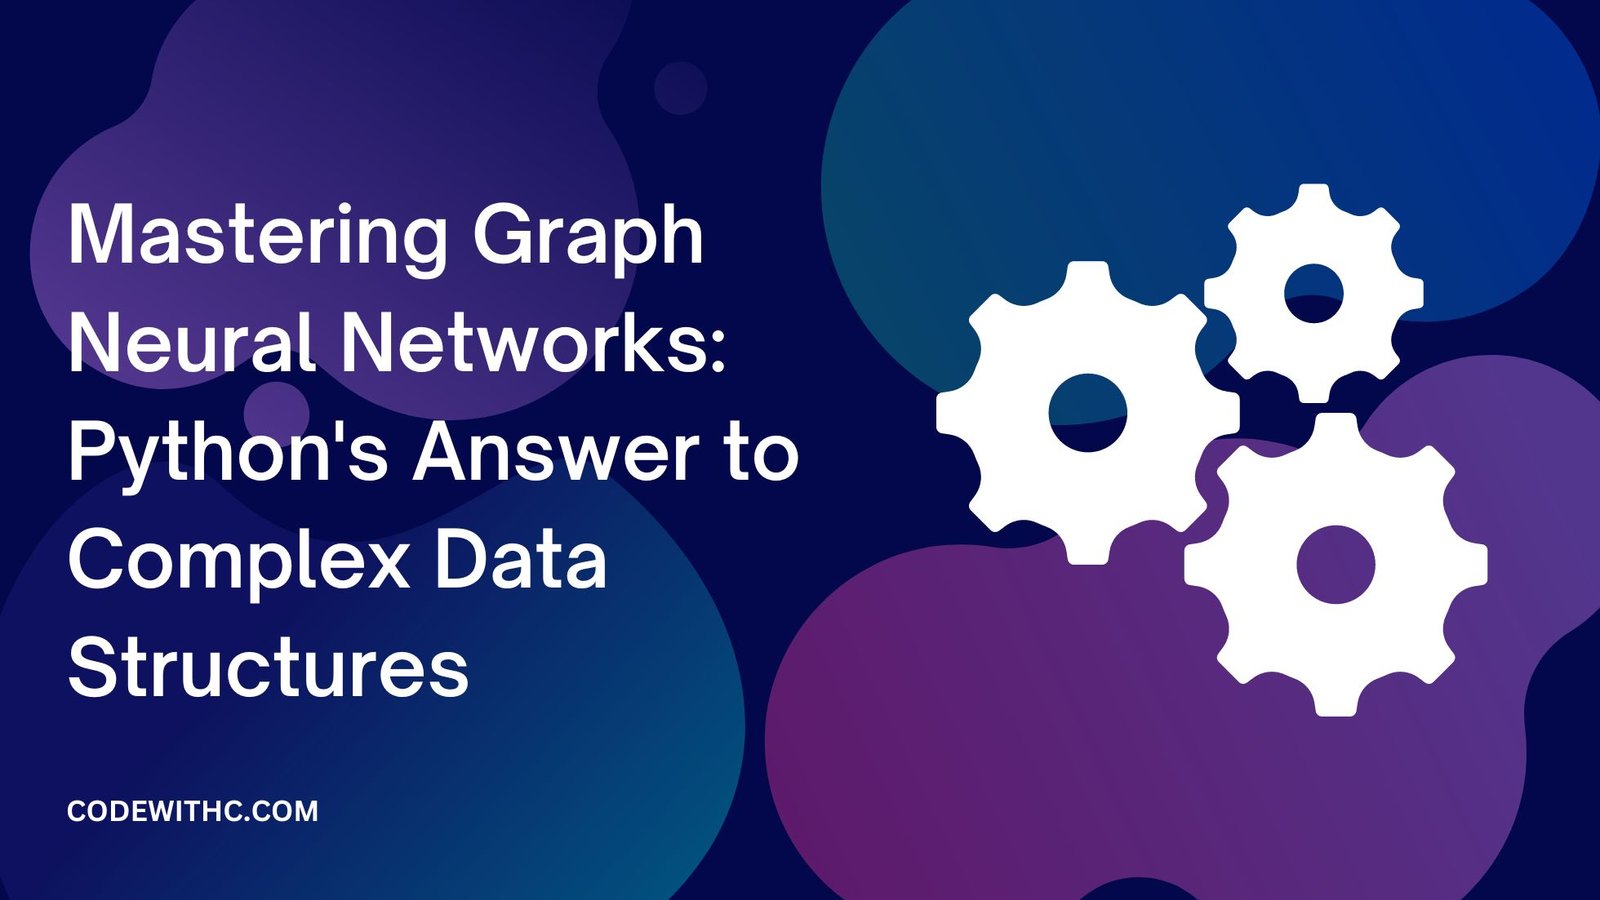 Mastering Graph Neural Networks: Python's Answer to Complex Data Structures